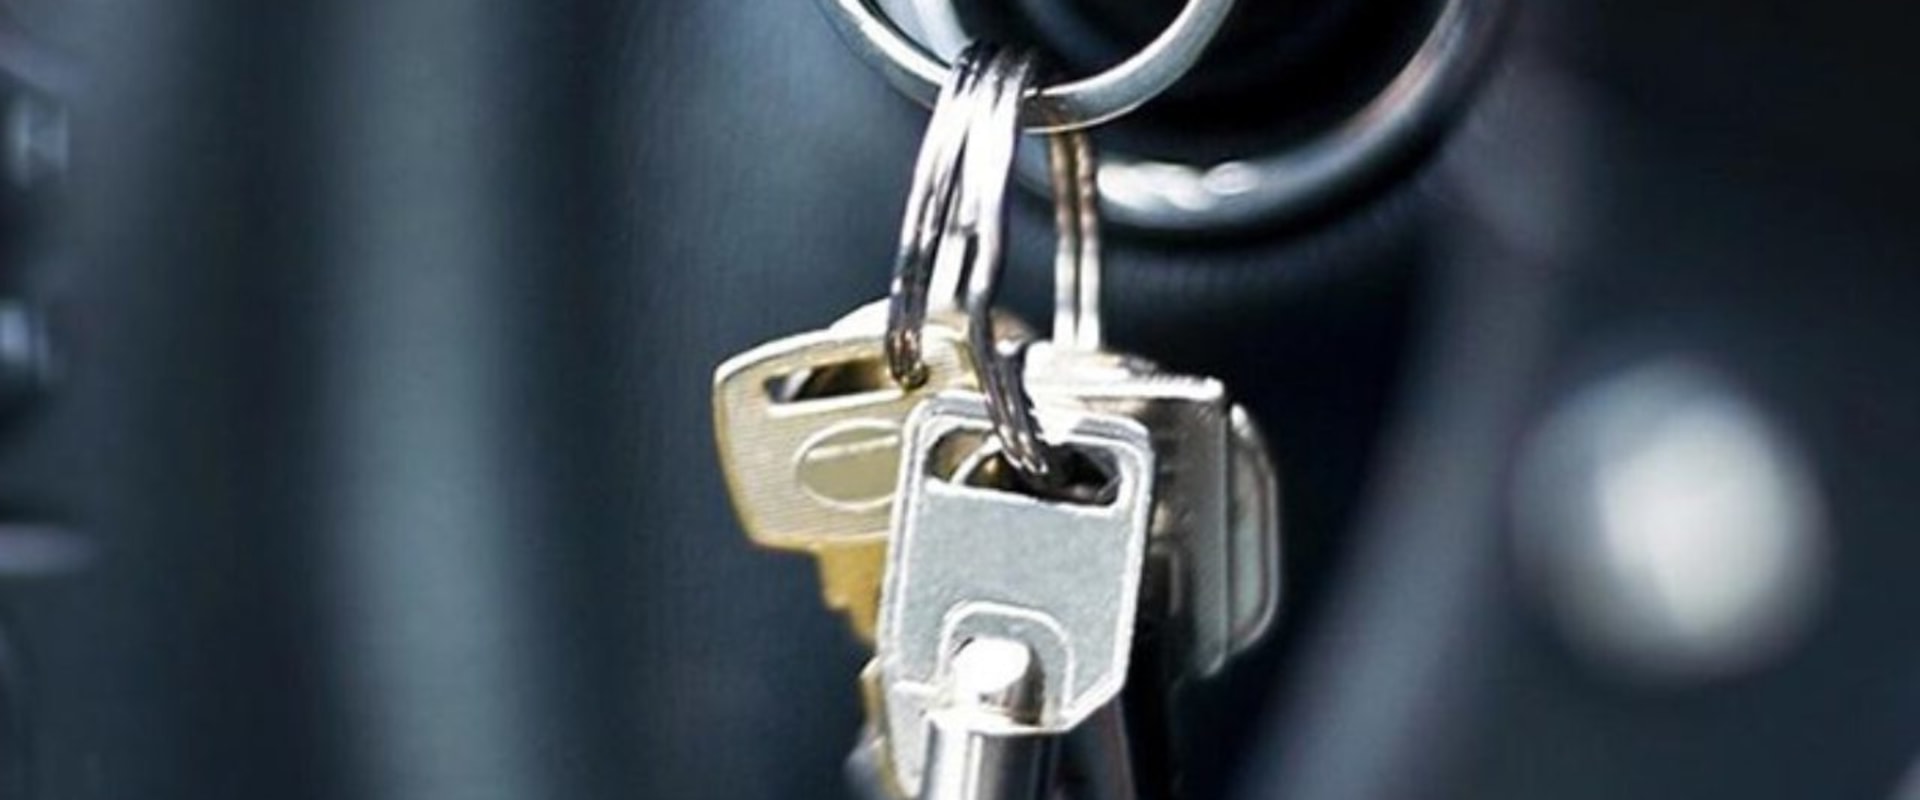 Do I Need to Have My Vehicle Make and Model When Calling a Car Locksmith in Spokane WA?